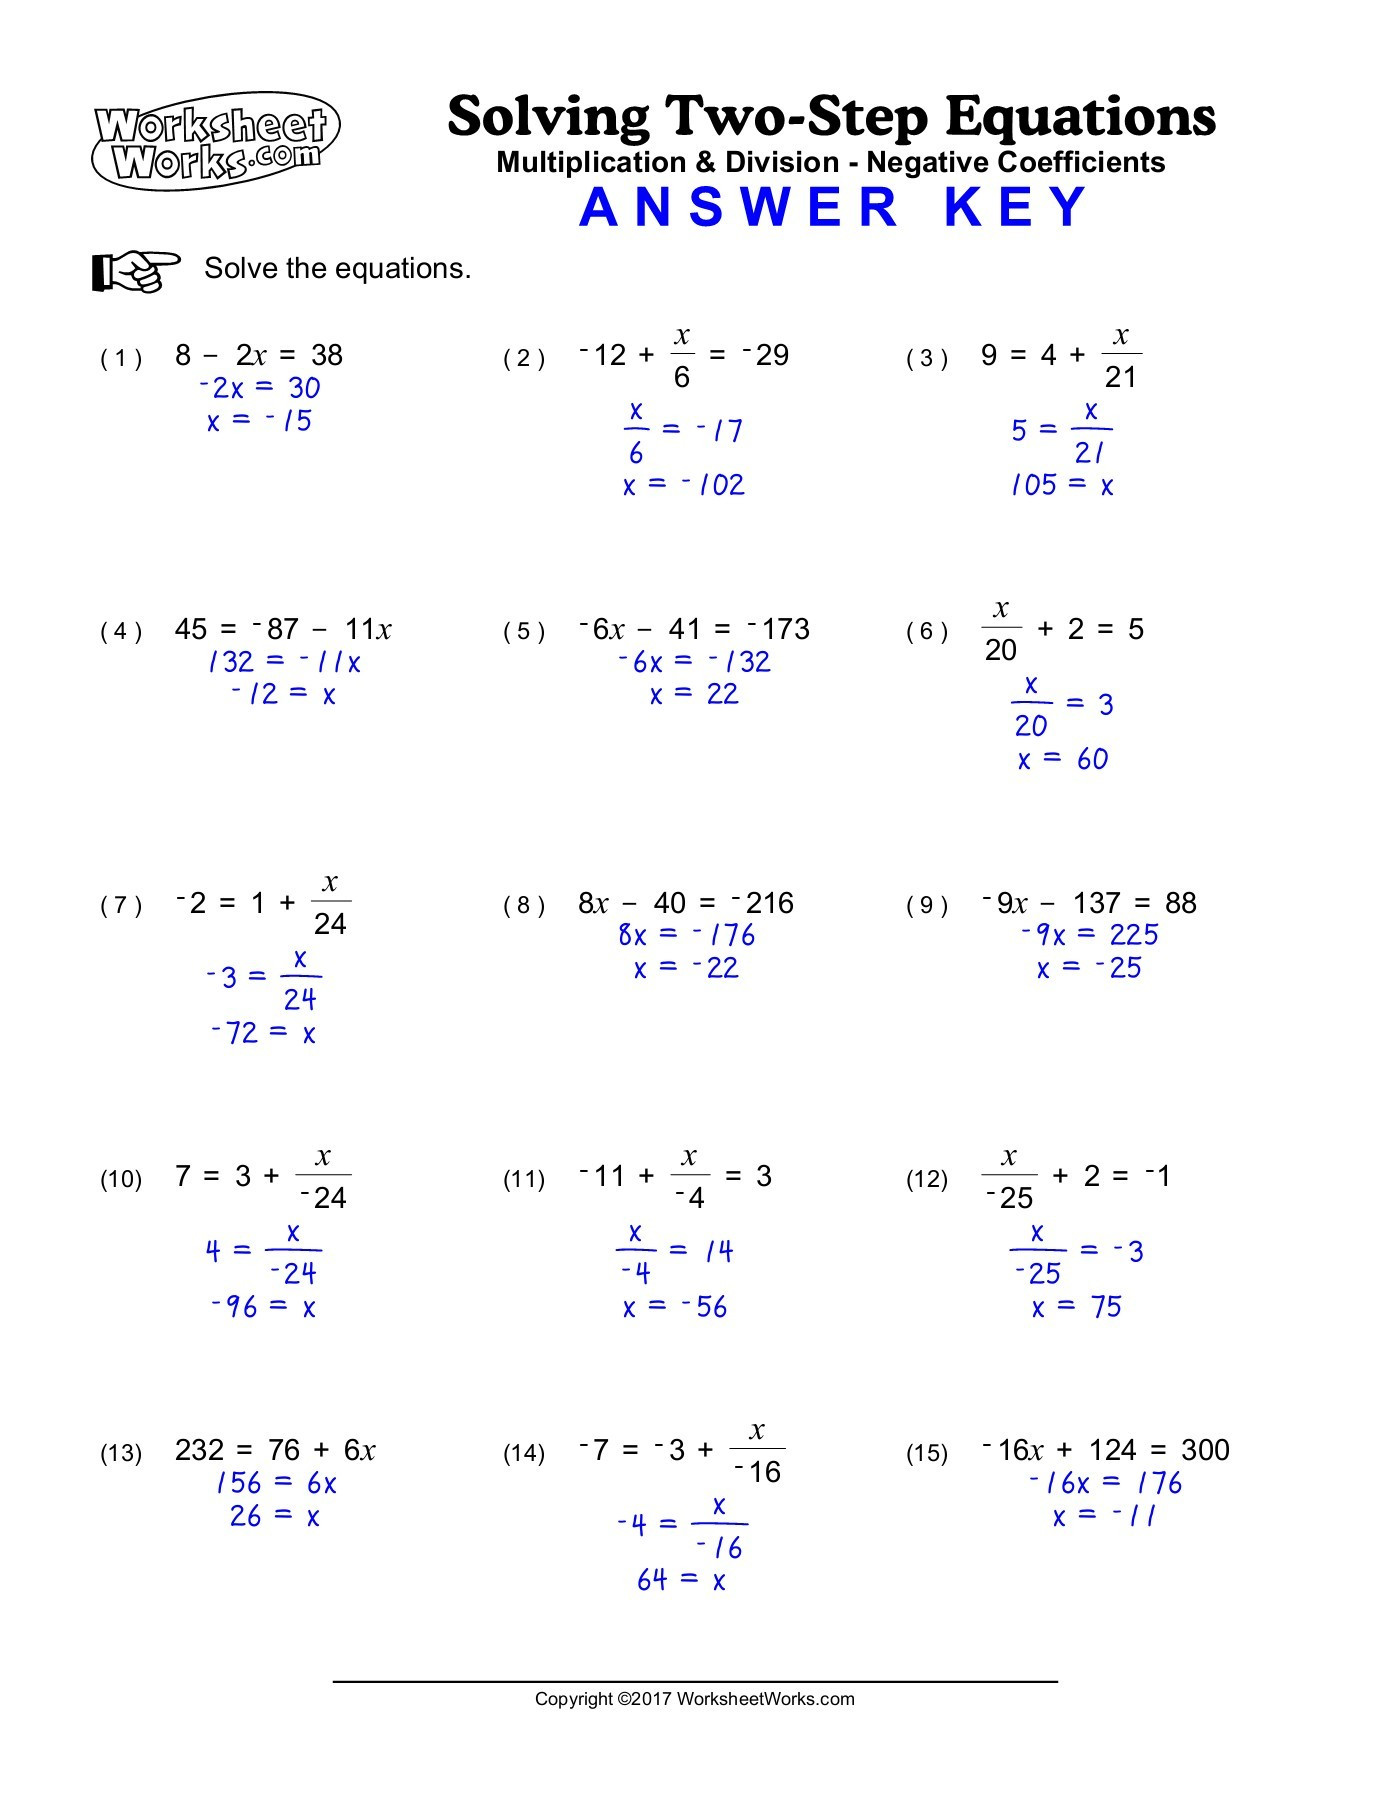 Two Step Equations Worksheet Worksheetworks solving Twostep Equations Hard Pages 1 2